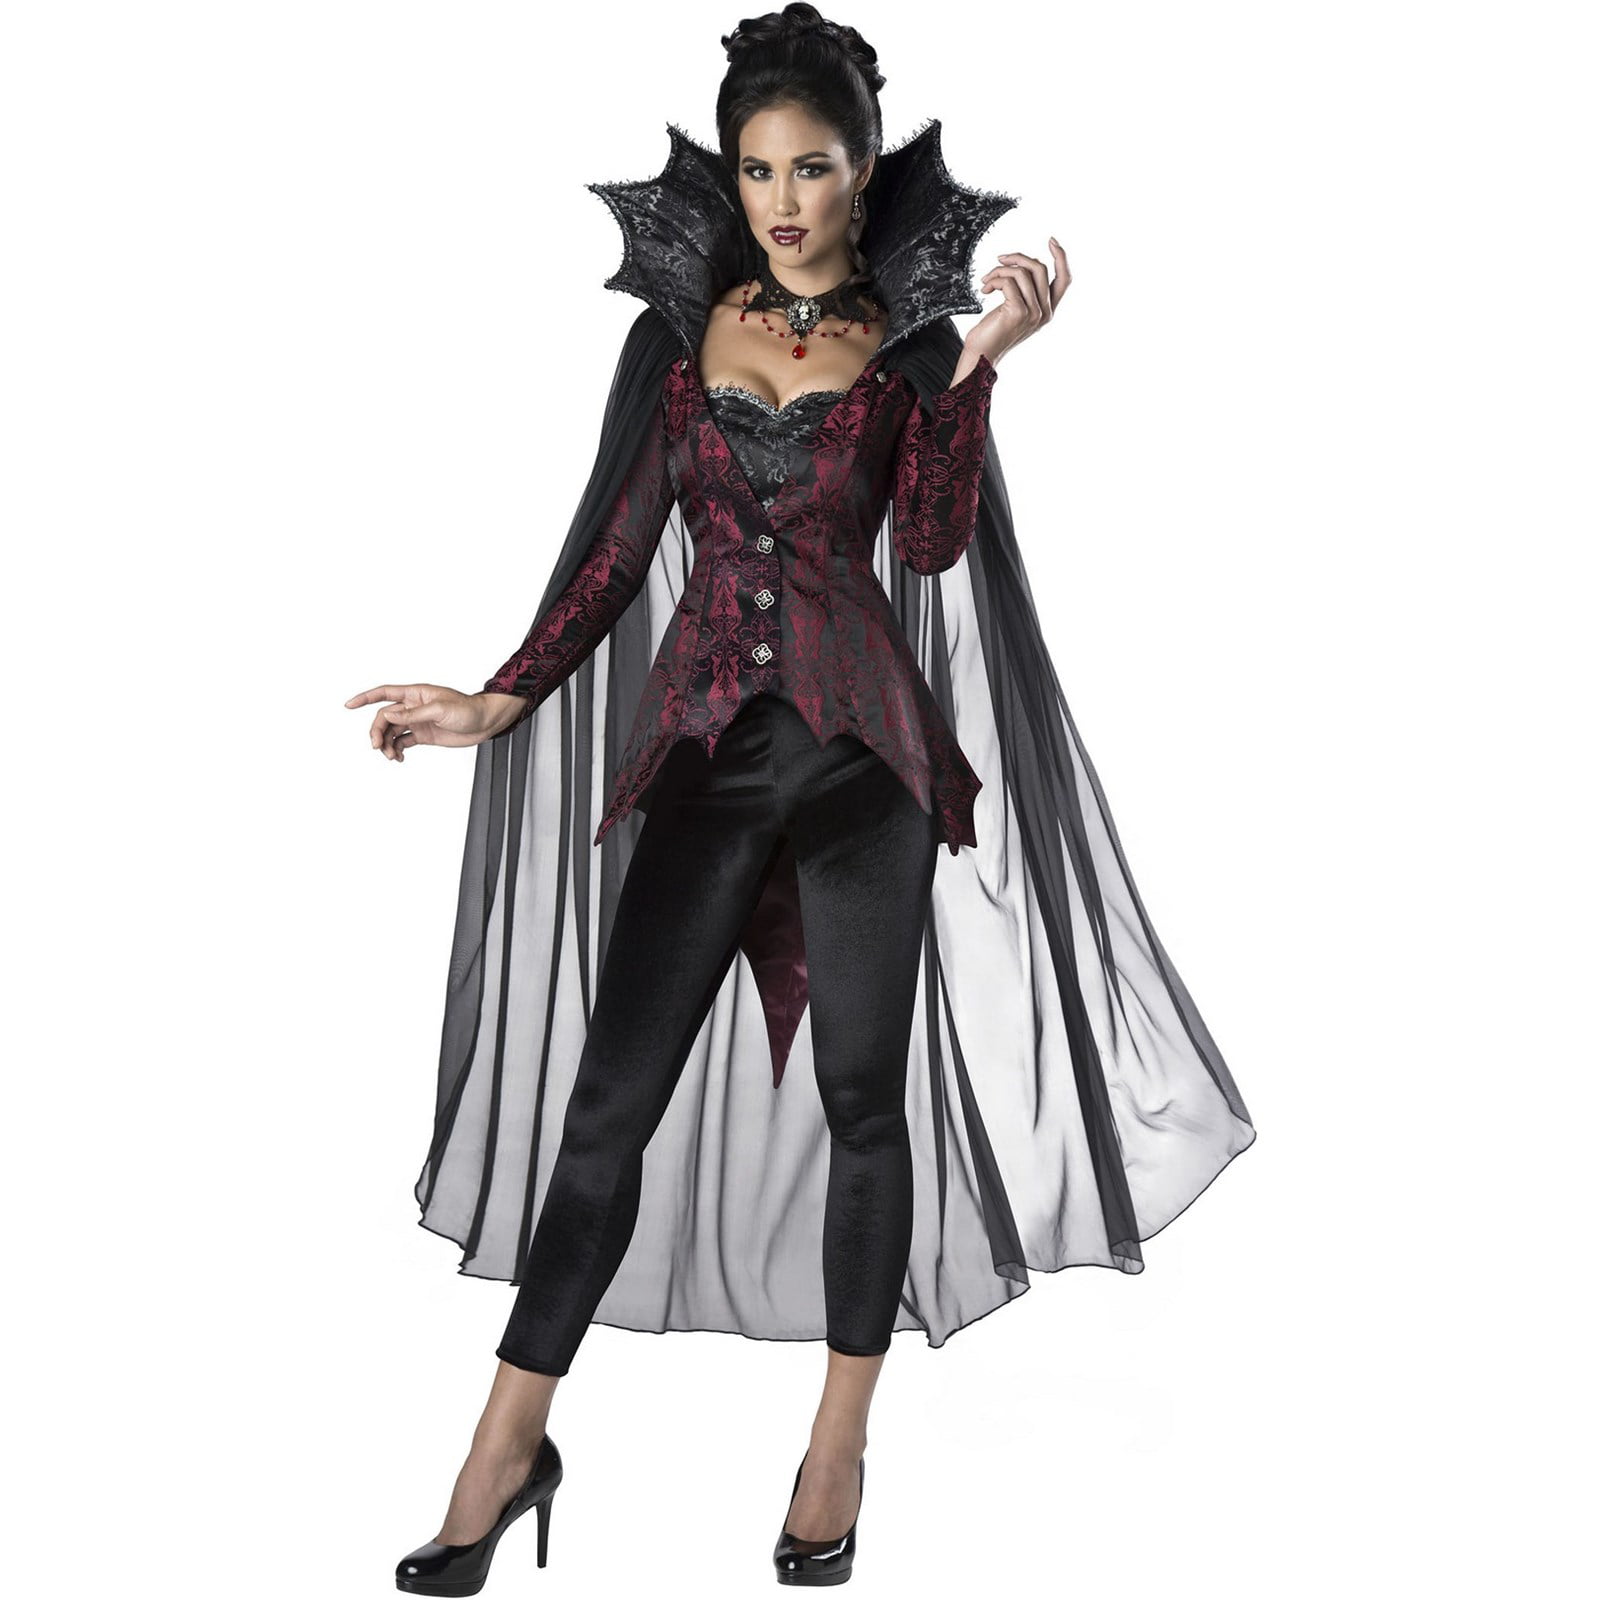 Arrives by Wed, Apr 27 Buy Gothic Romance Vampiress Women's Halloween Costume...